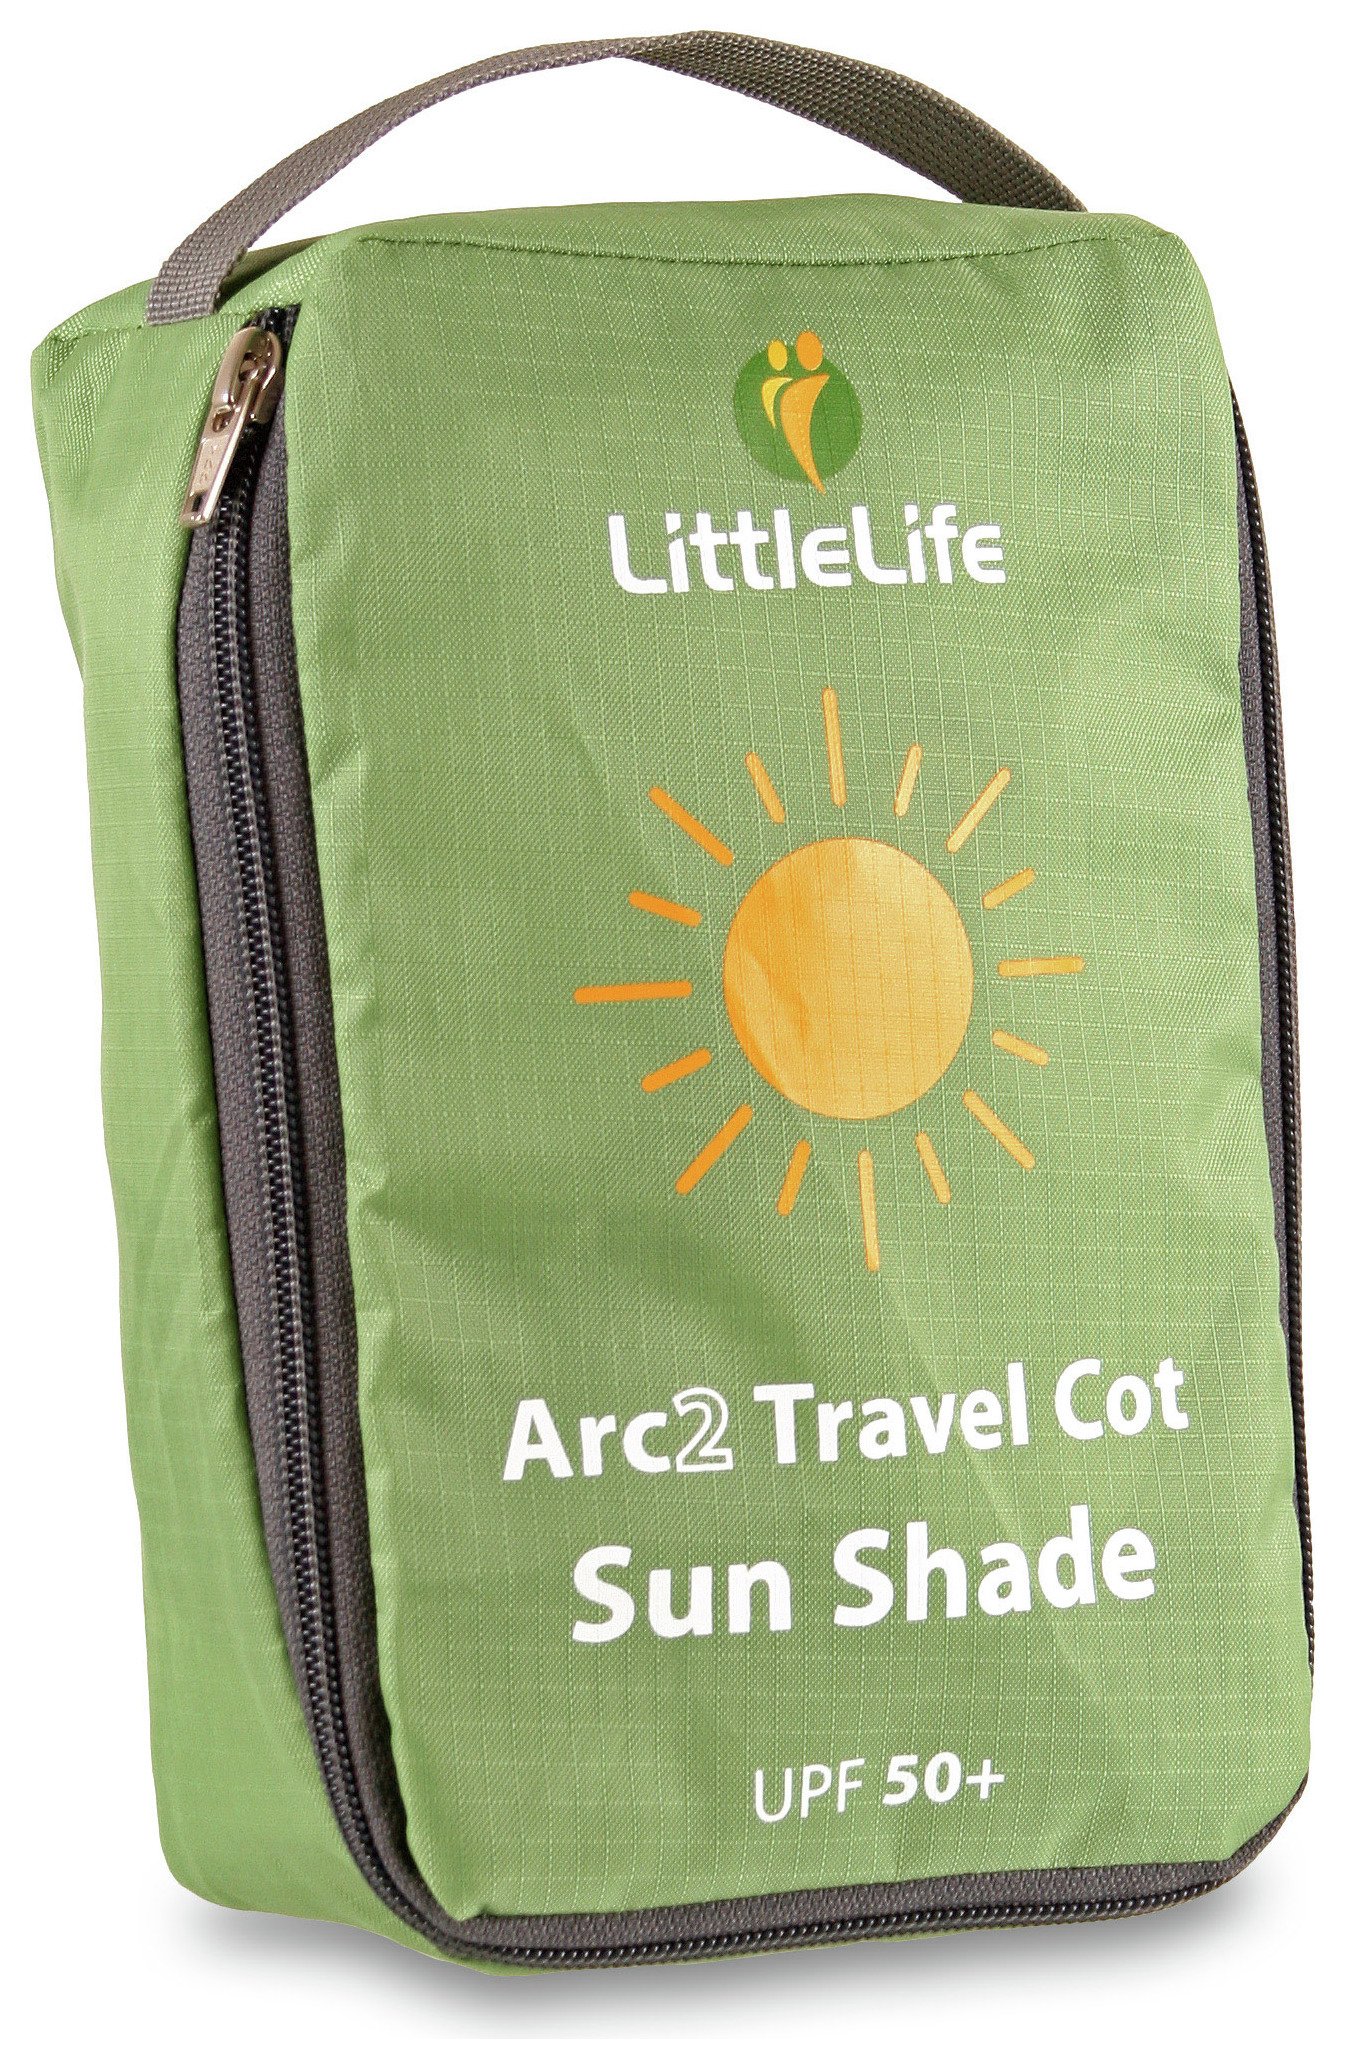 Littlelife Sunshade for Arc 2 Travel Cot